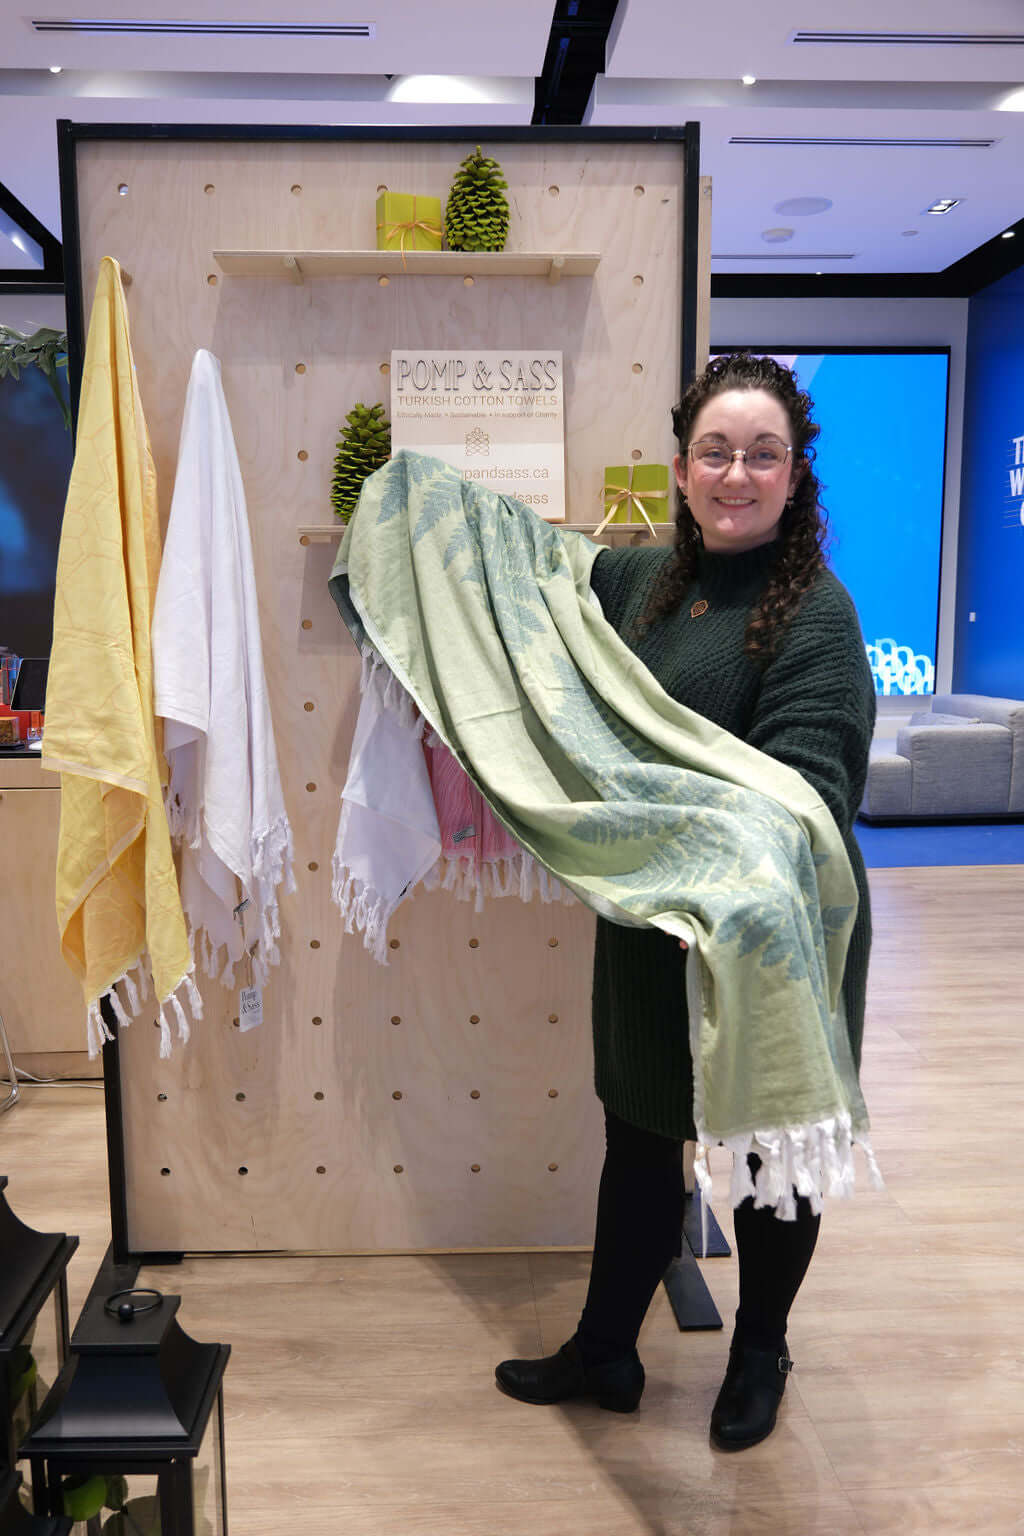 Nikky Starrett, founder of Pomp & Sass stands holding the Fern green Turkish cotton body towel at the RBC eXperience Market located in the Sherway Garden Mall 2022